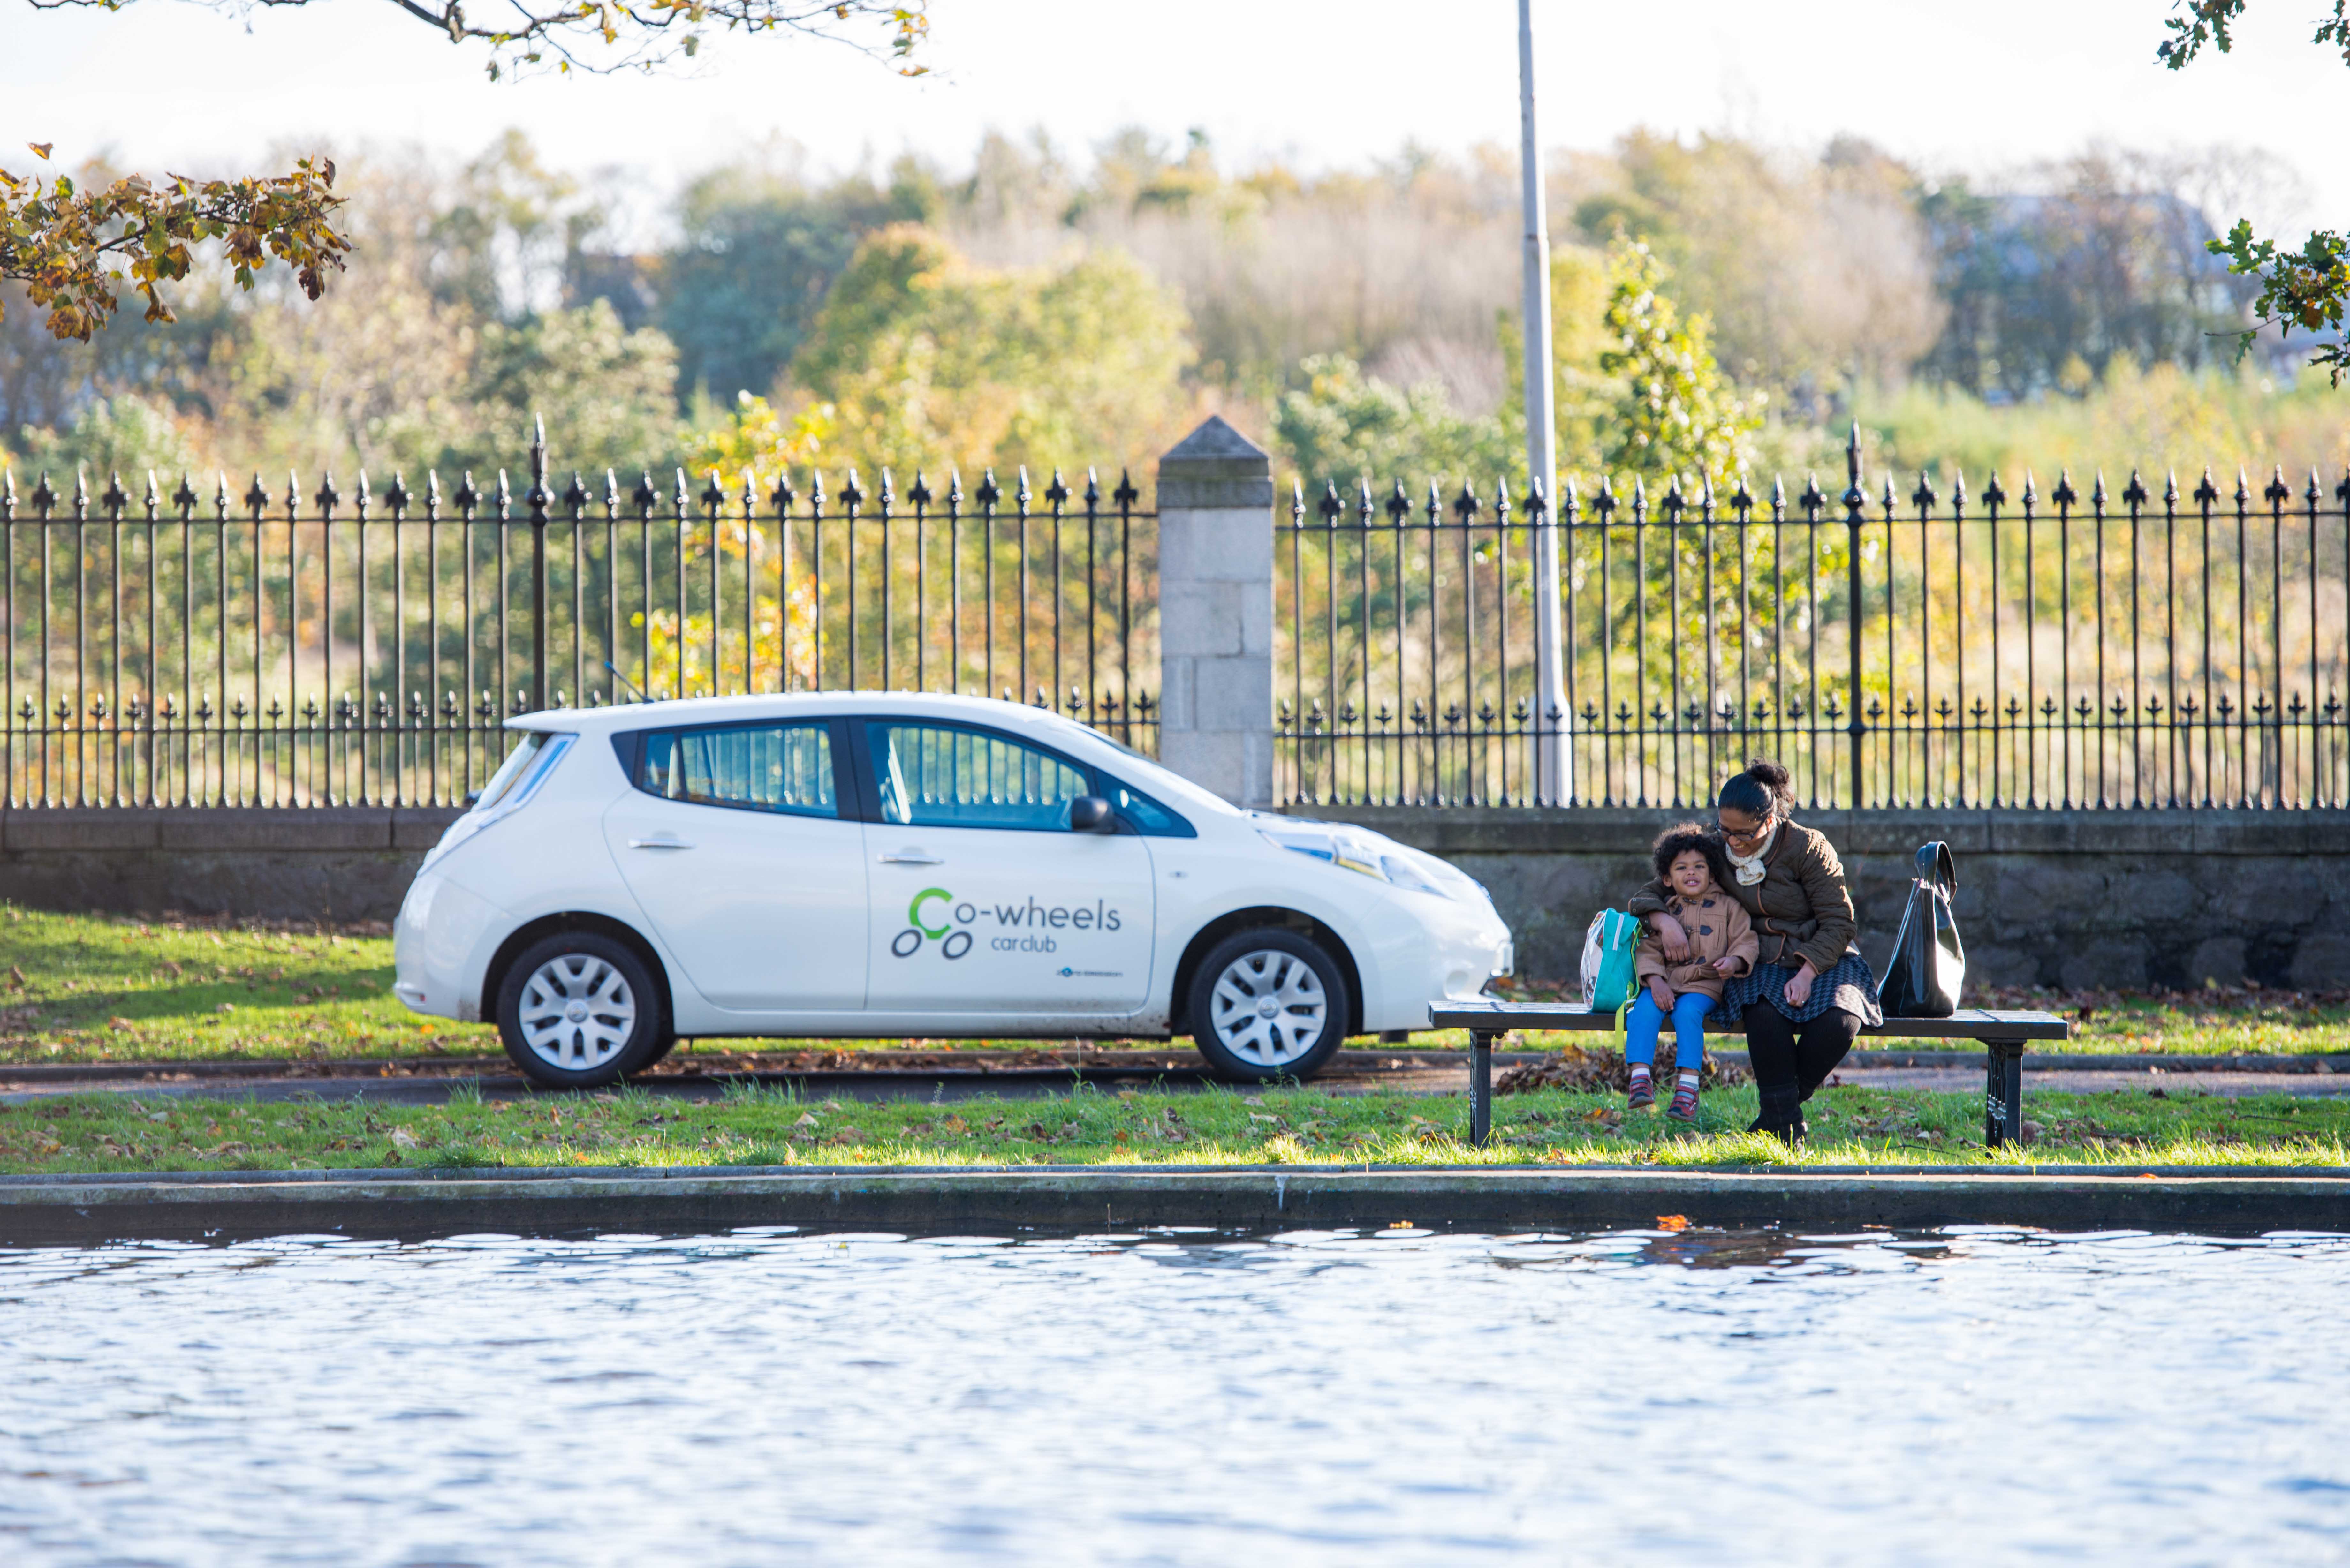 A photo of a mother and child sitting on a bench by a pond, with a Co-Wheels shared car in the background.